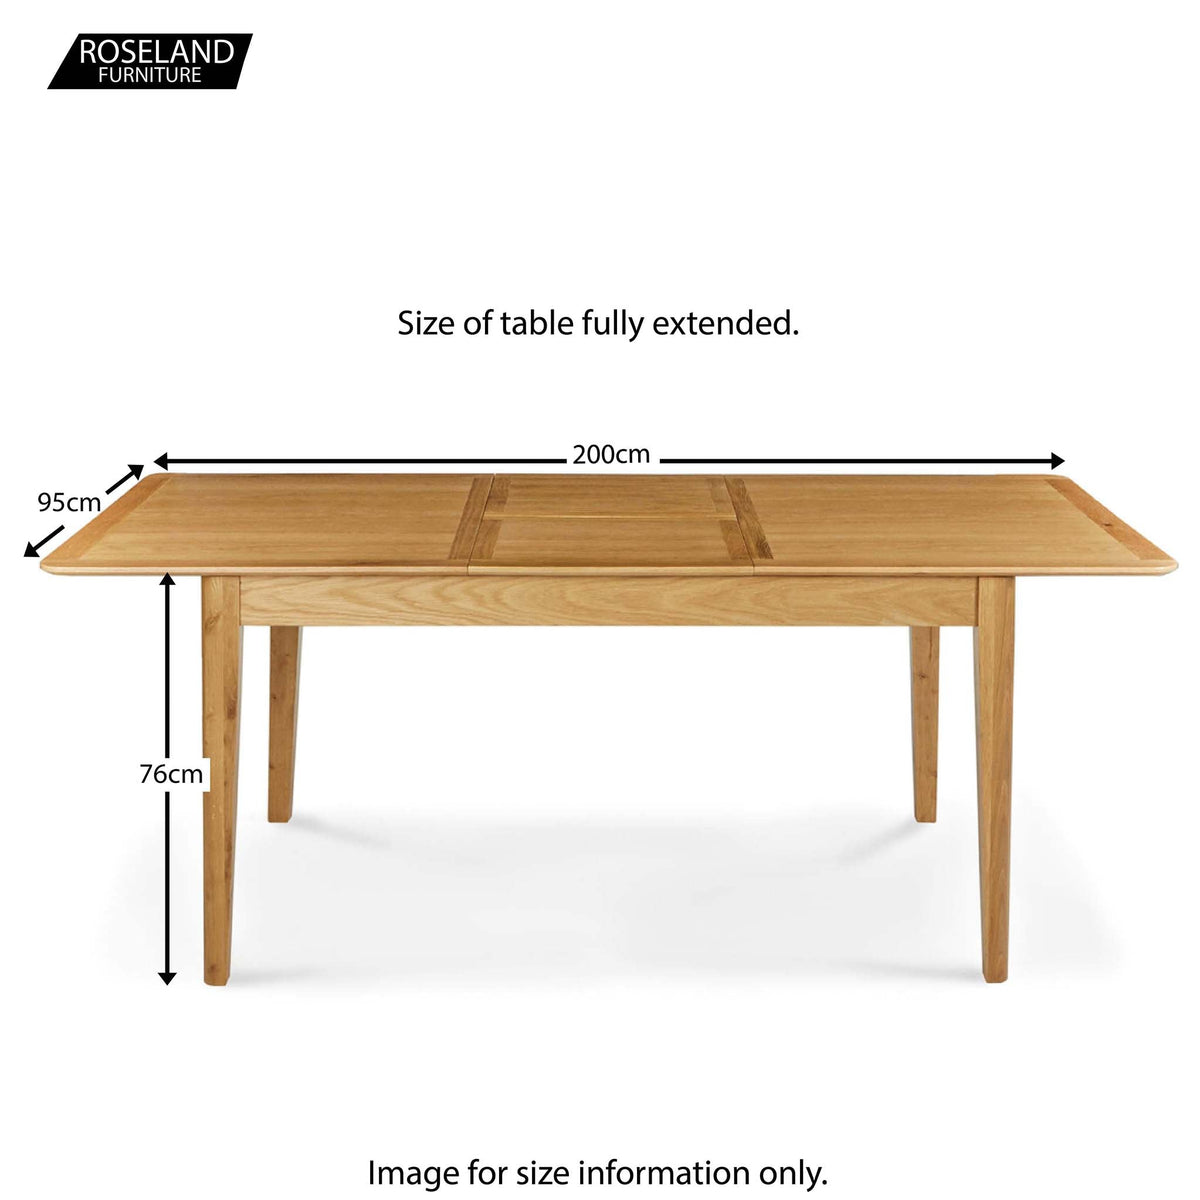 Alba Oak Extending Table - Size guide of table when extended